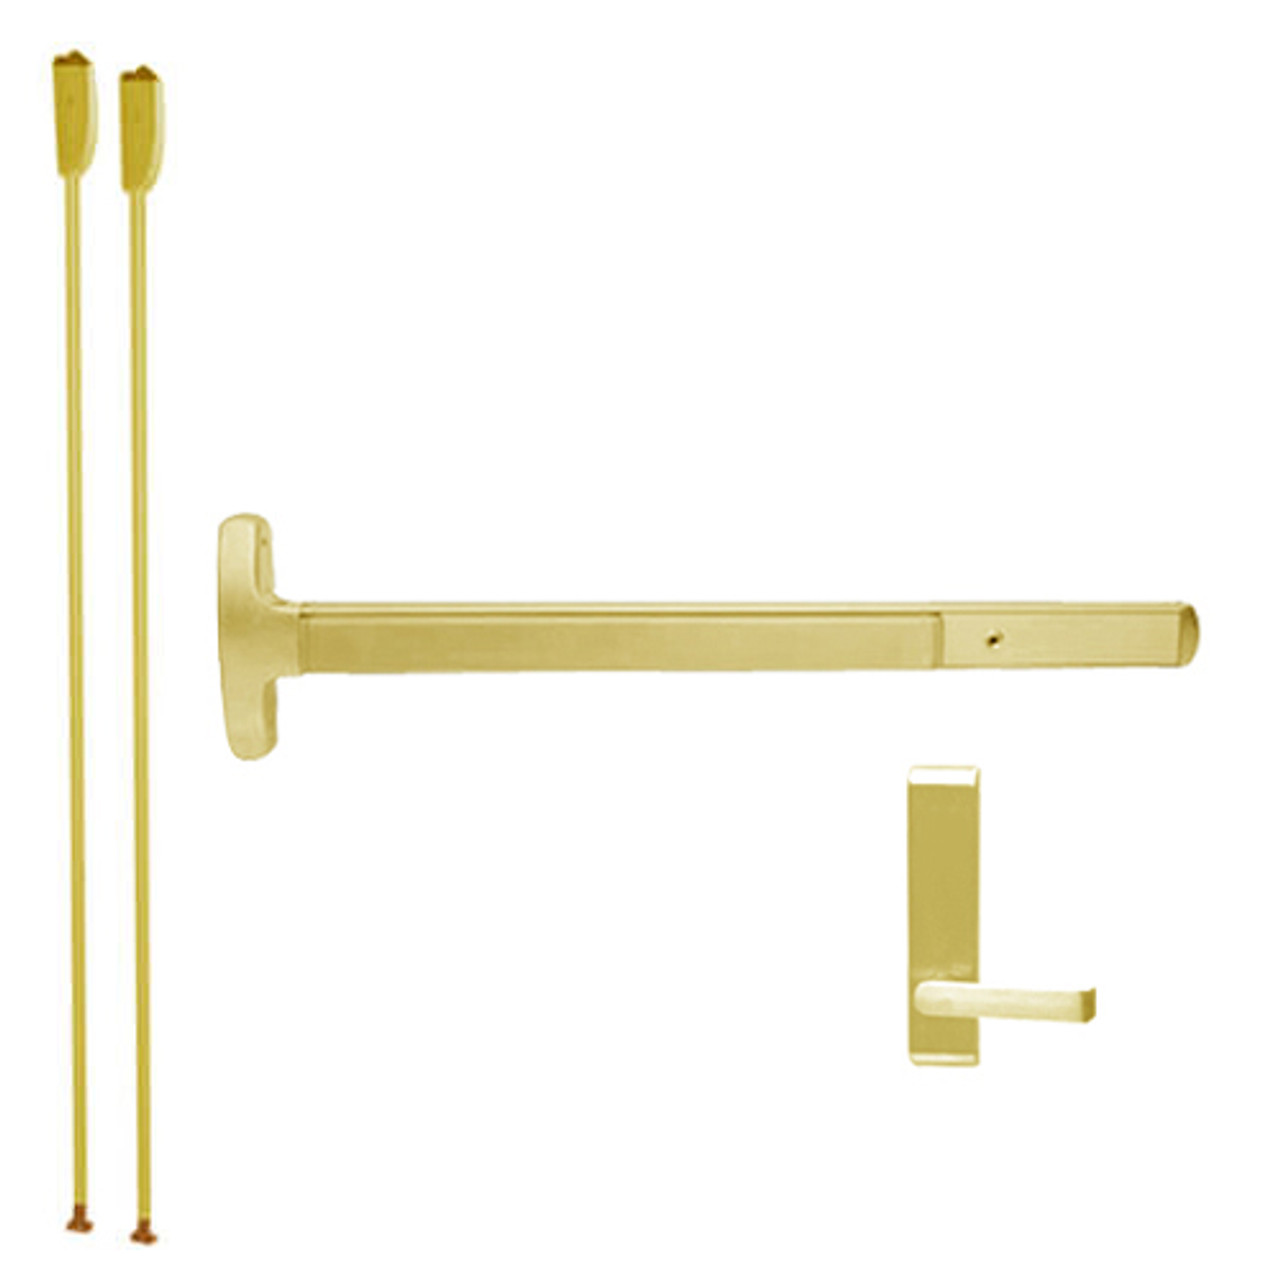 24-V-L-DT-Dane-US3-2-LHR Falcon Exit Device in Polished Brass